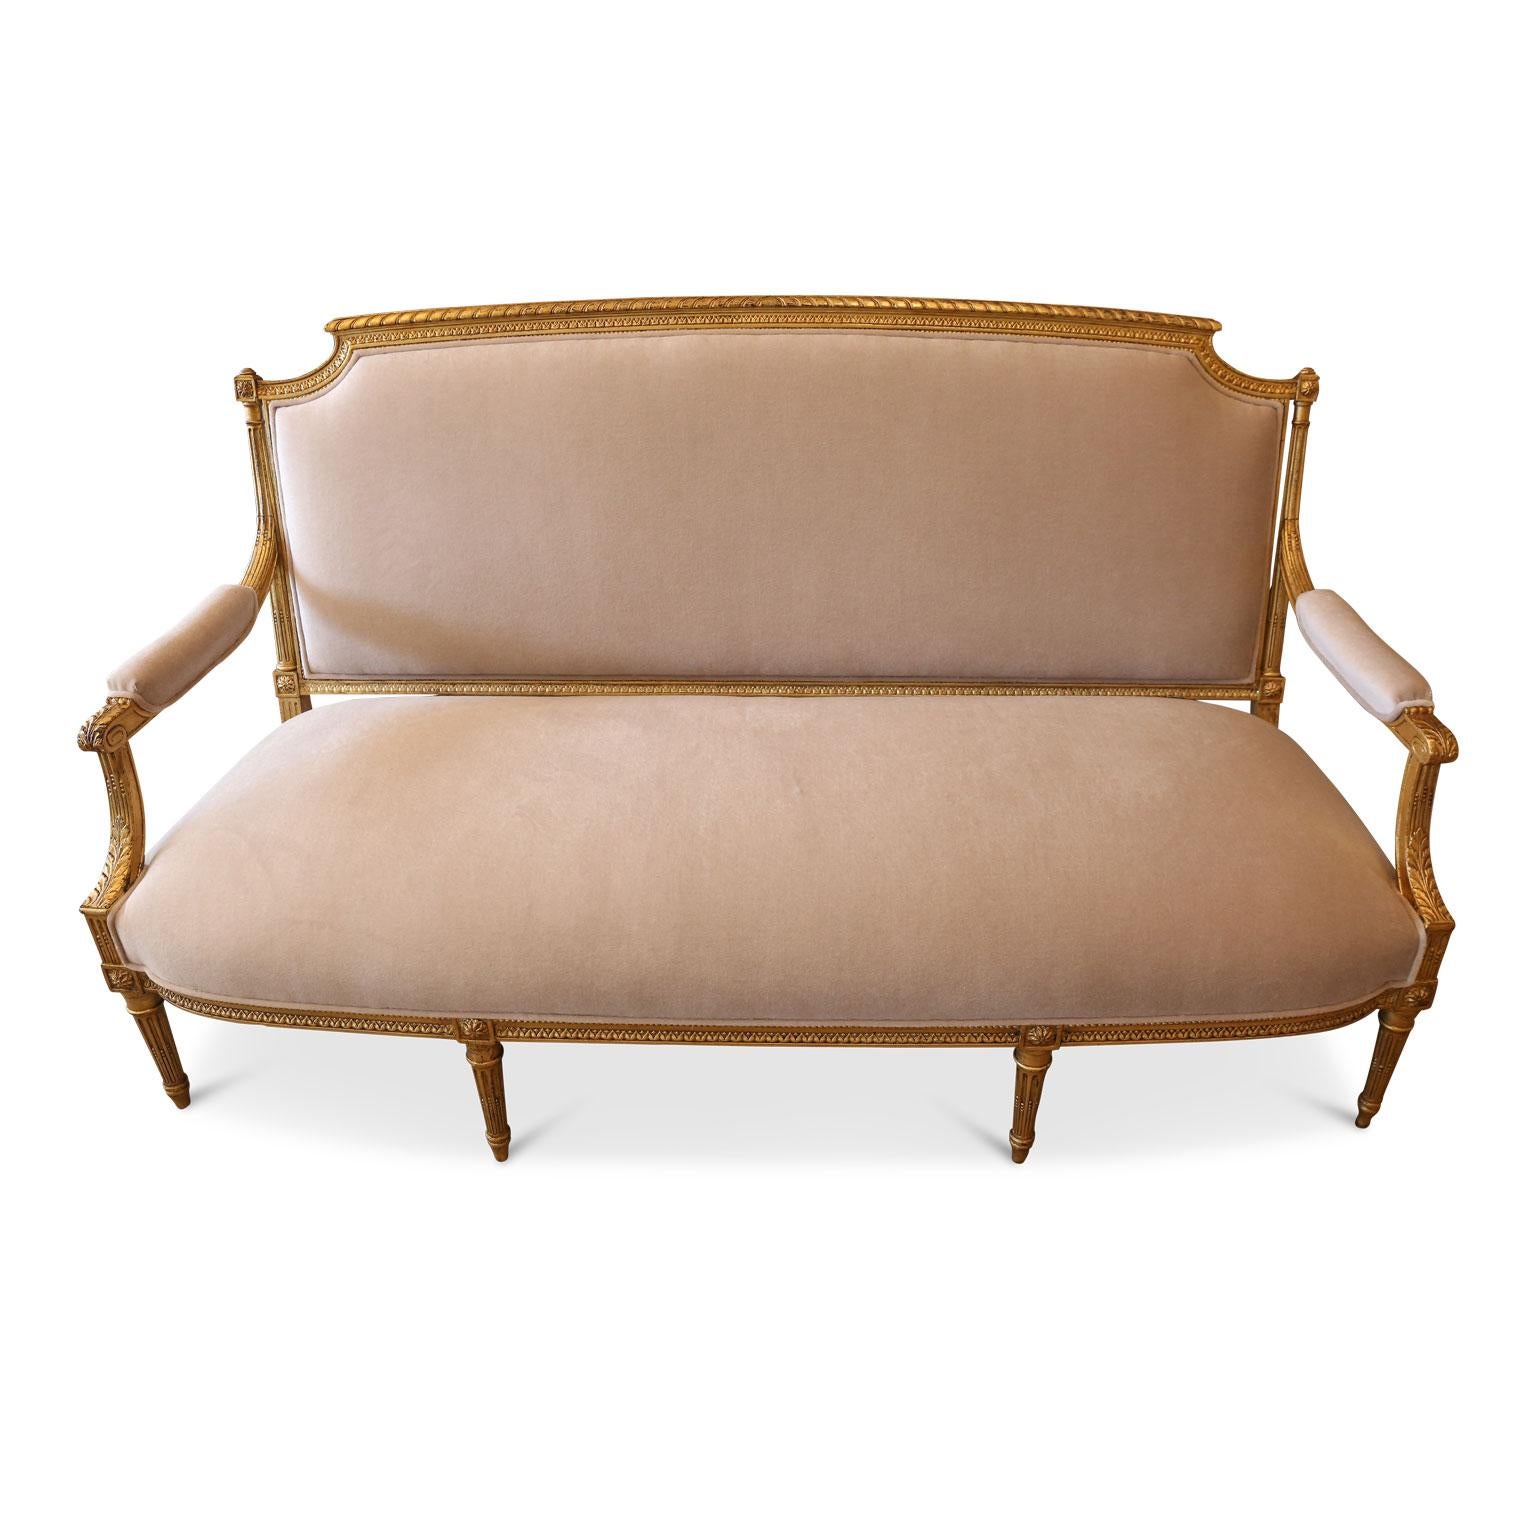 Hand-Carved Gilded French Settee